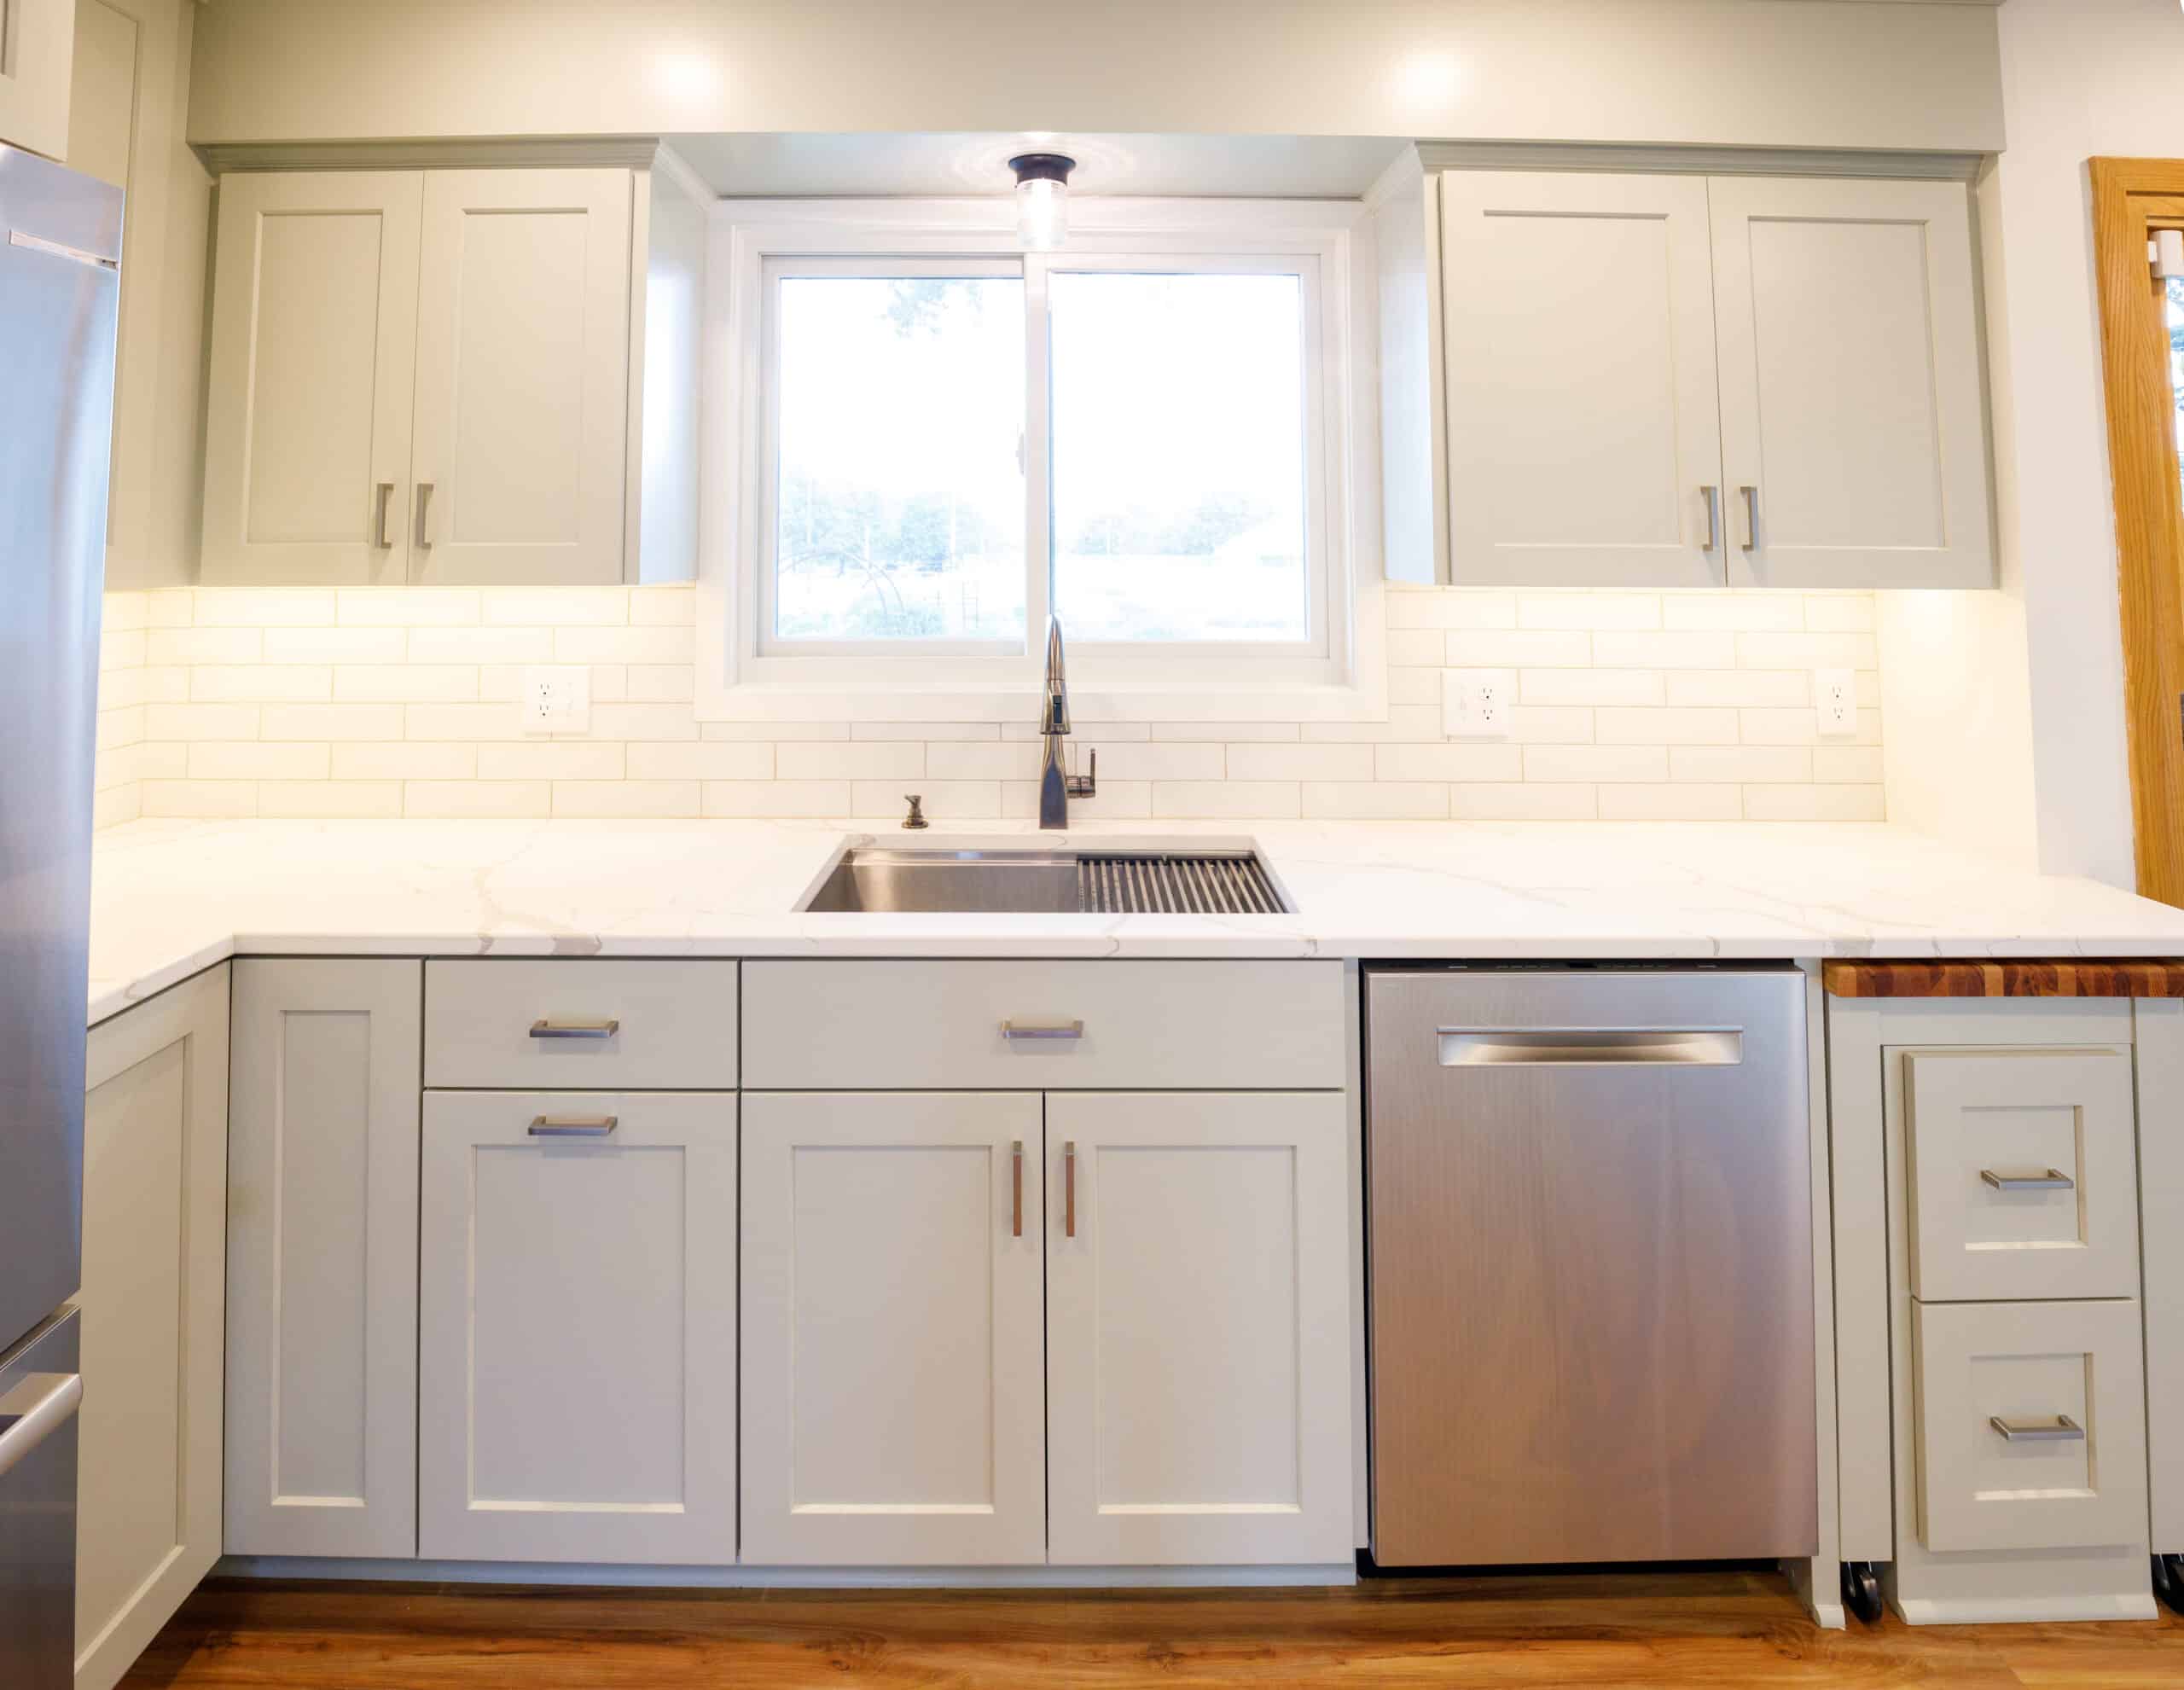 Kitchen sink and wall cabinets